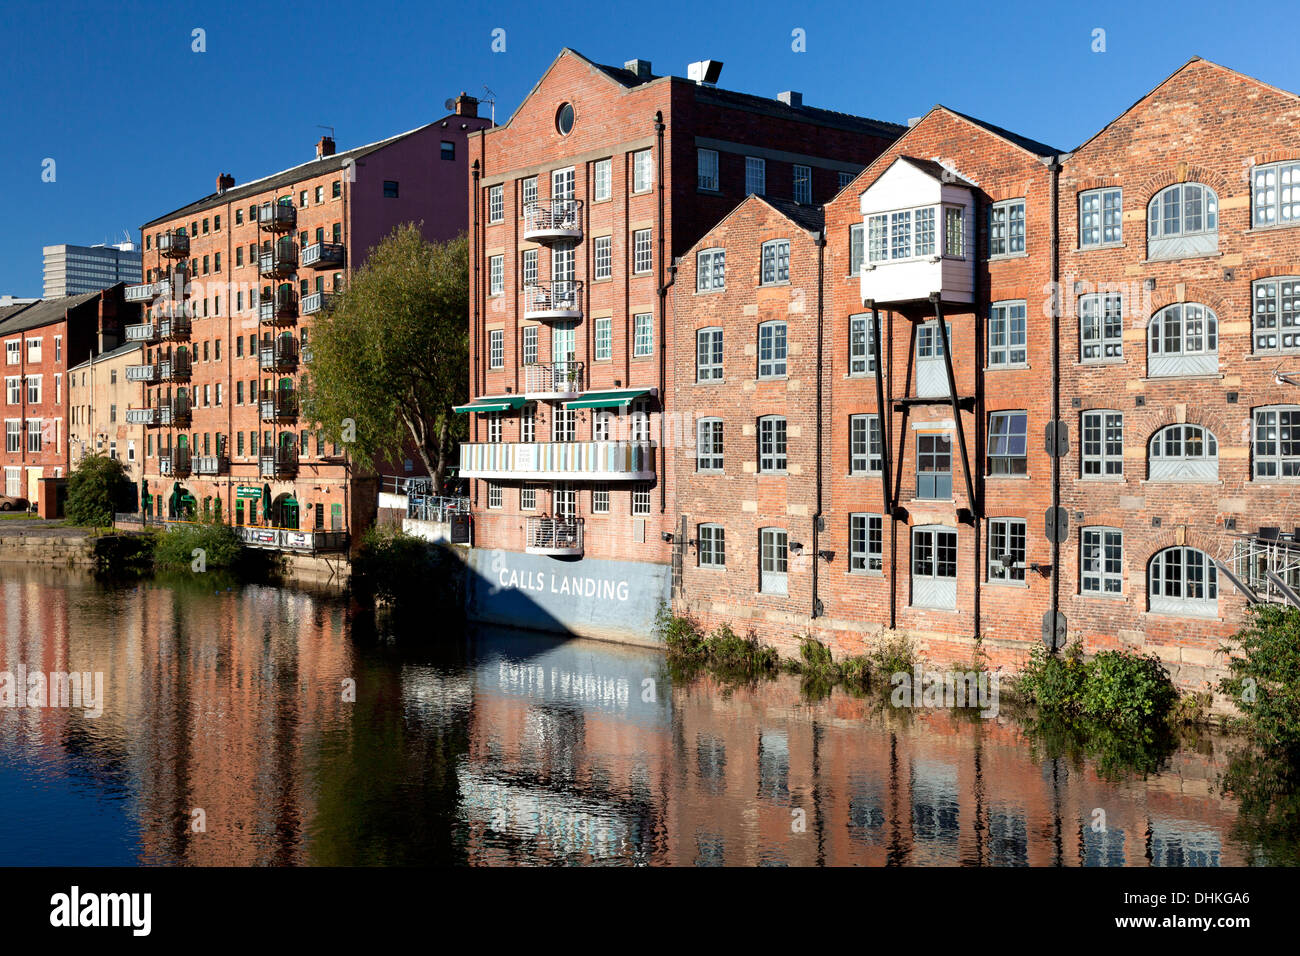 Converted warehouses beside the River Aire at Calls Landing, Leeds, West Yorkshire Stock Photo